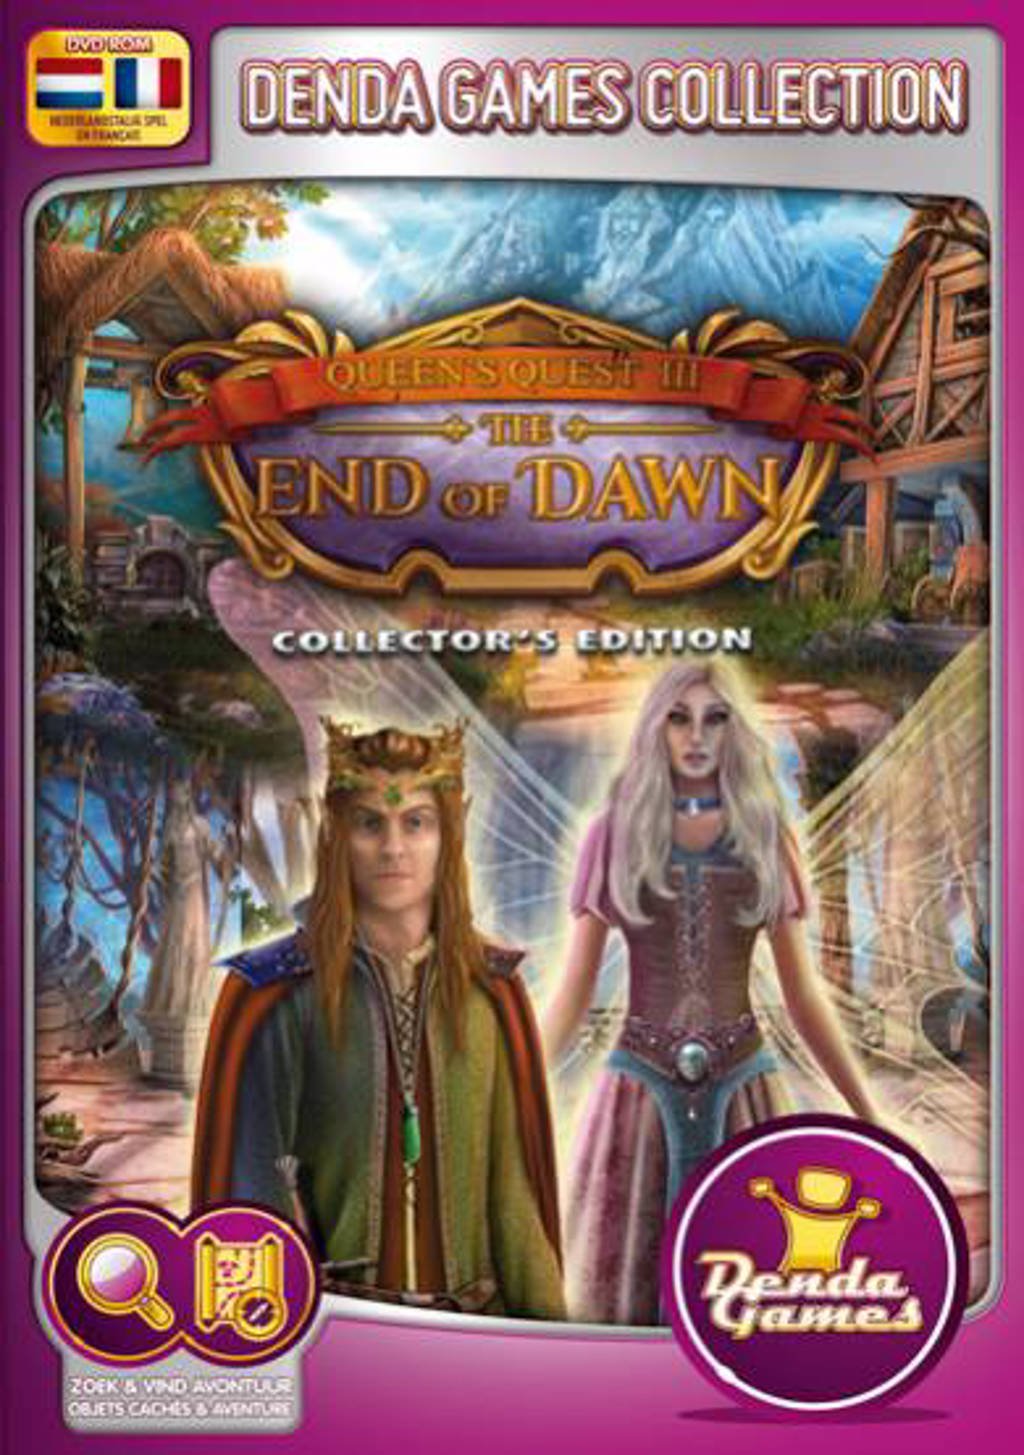 Queen's quest 3 - The end of dawn (PC)